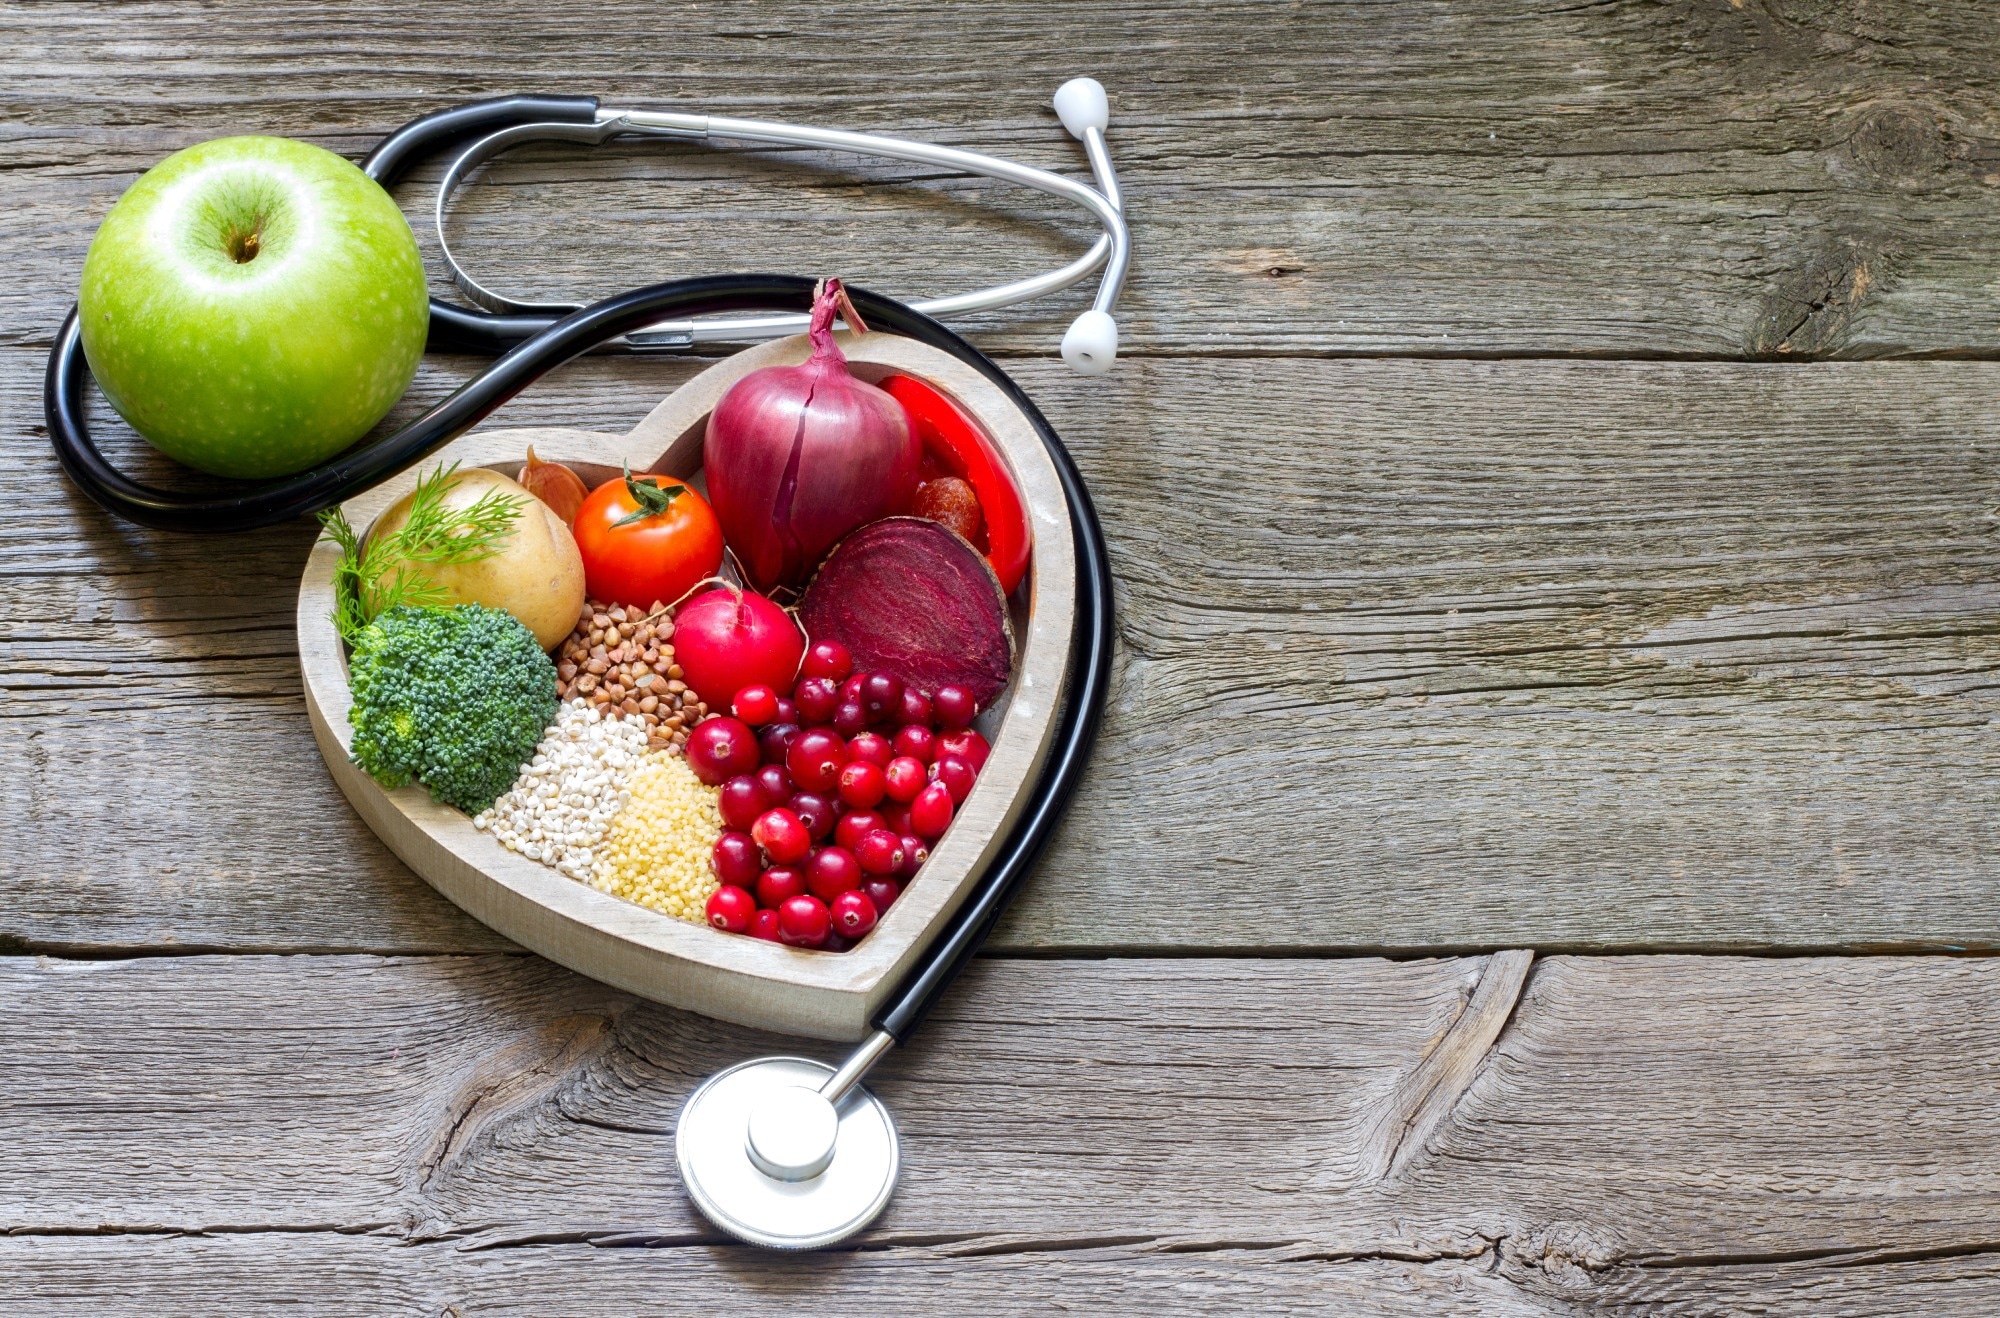 Study: Lipoprotein(a) and Diet – A Challenge for a Role of Saturated Fat in Cardiovascular Risk Reduction? Image Credit: udra11/Shutterstock.com